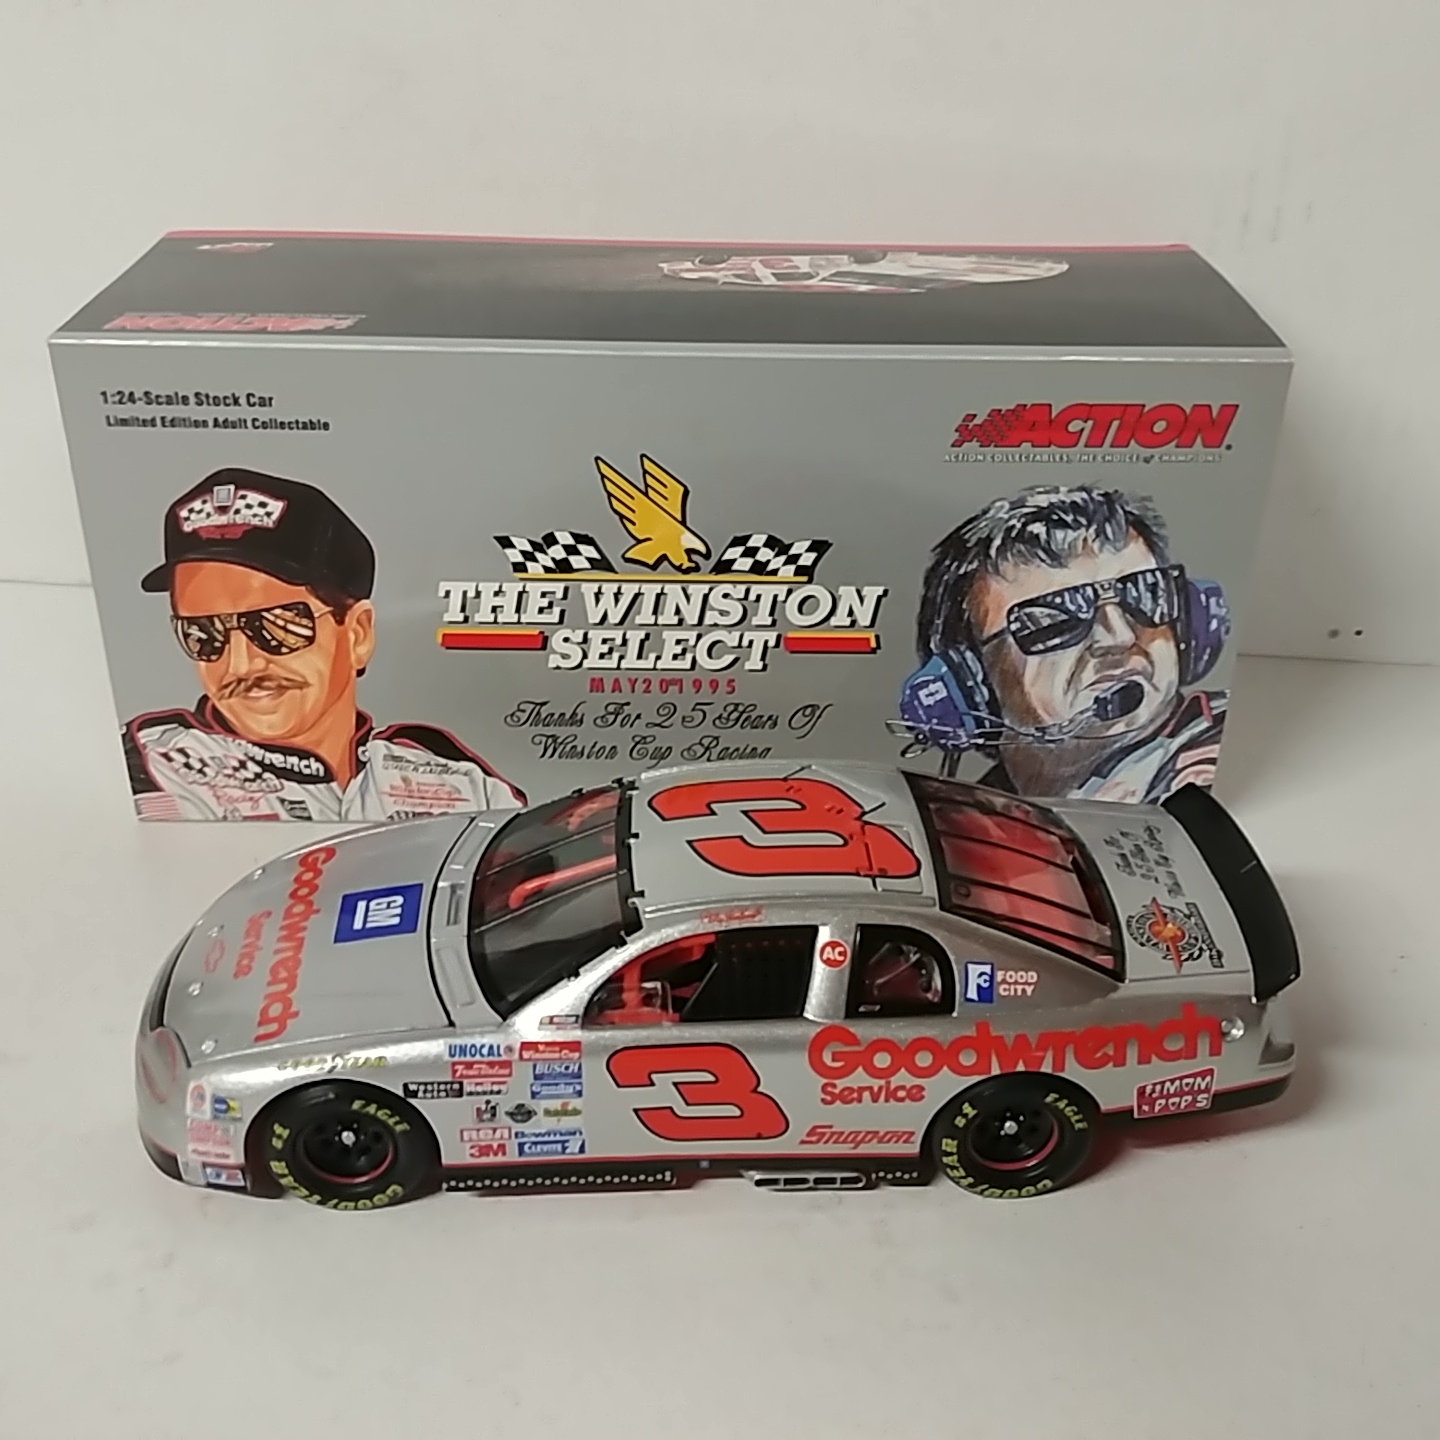 1995 Dale Earnhardt 1/24th GM Goodwrench "Silver Select" clear window bank